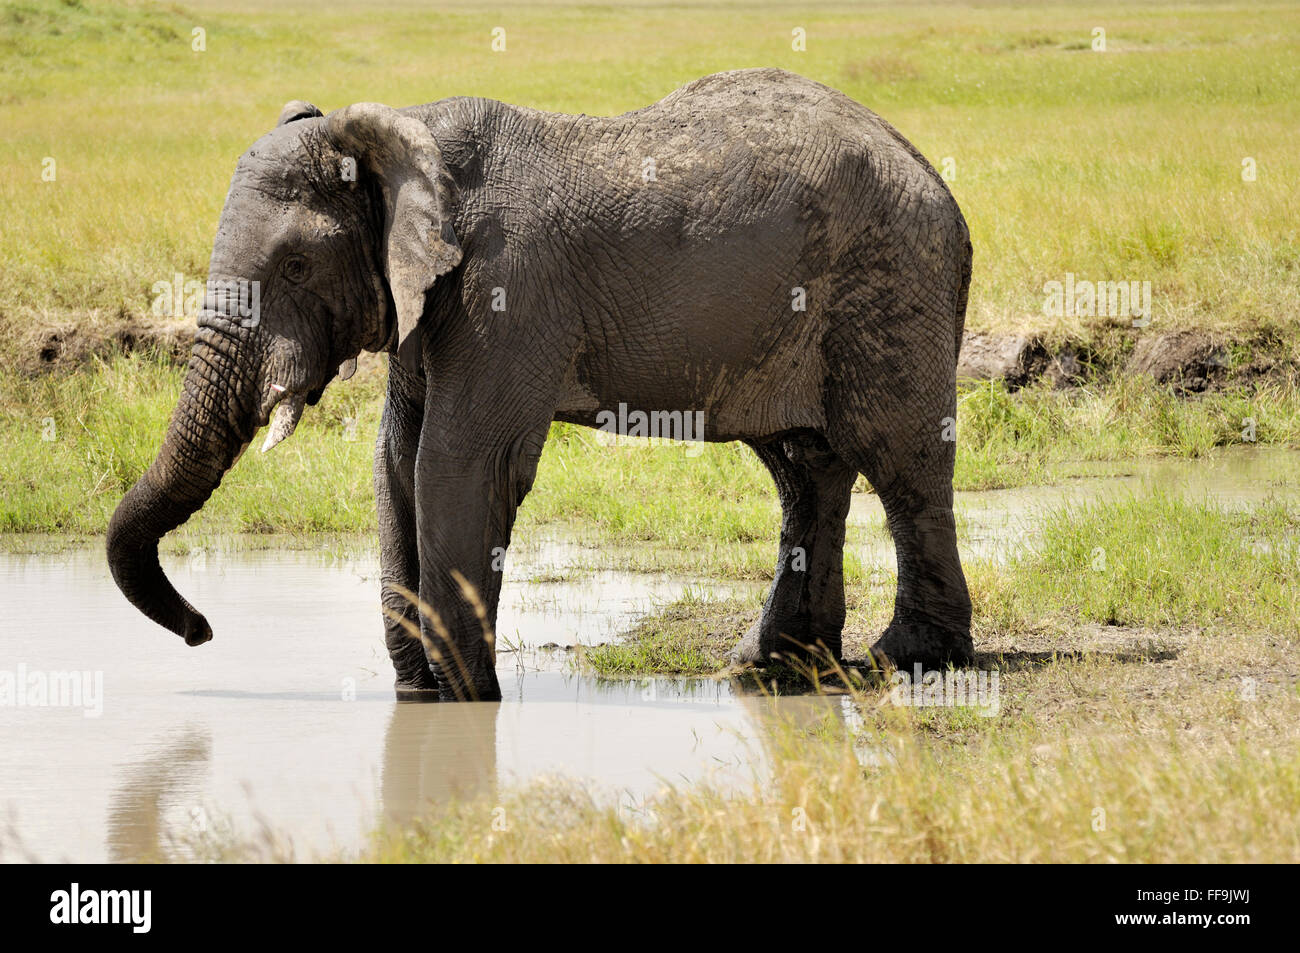 Elephant at a watering hole in the Serengeti Stock Photo